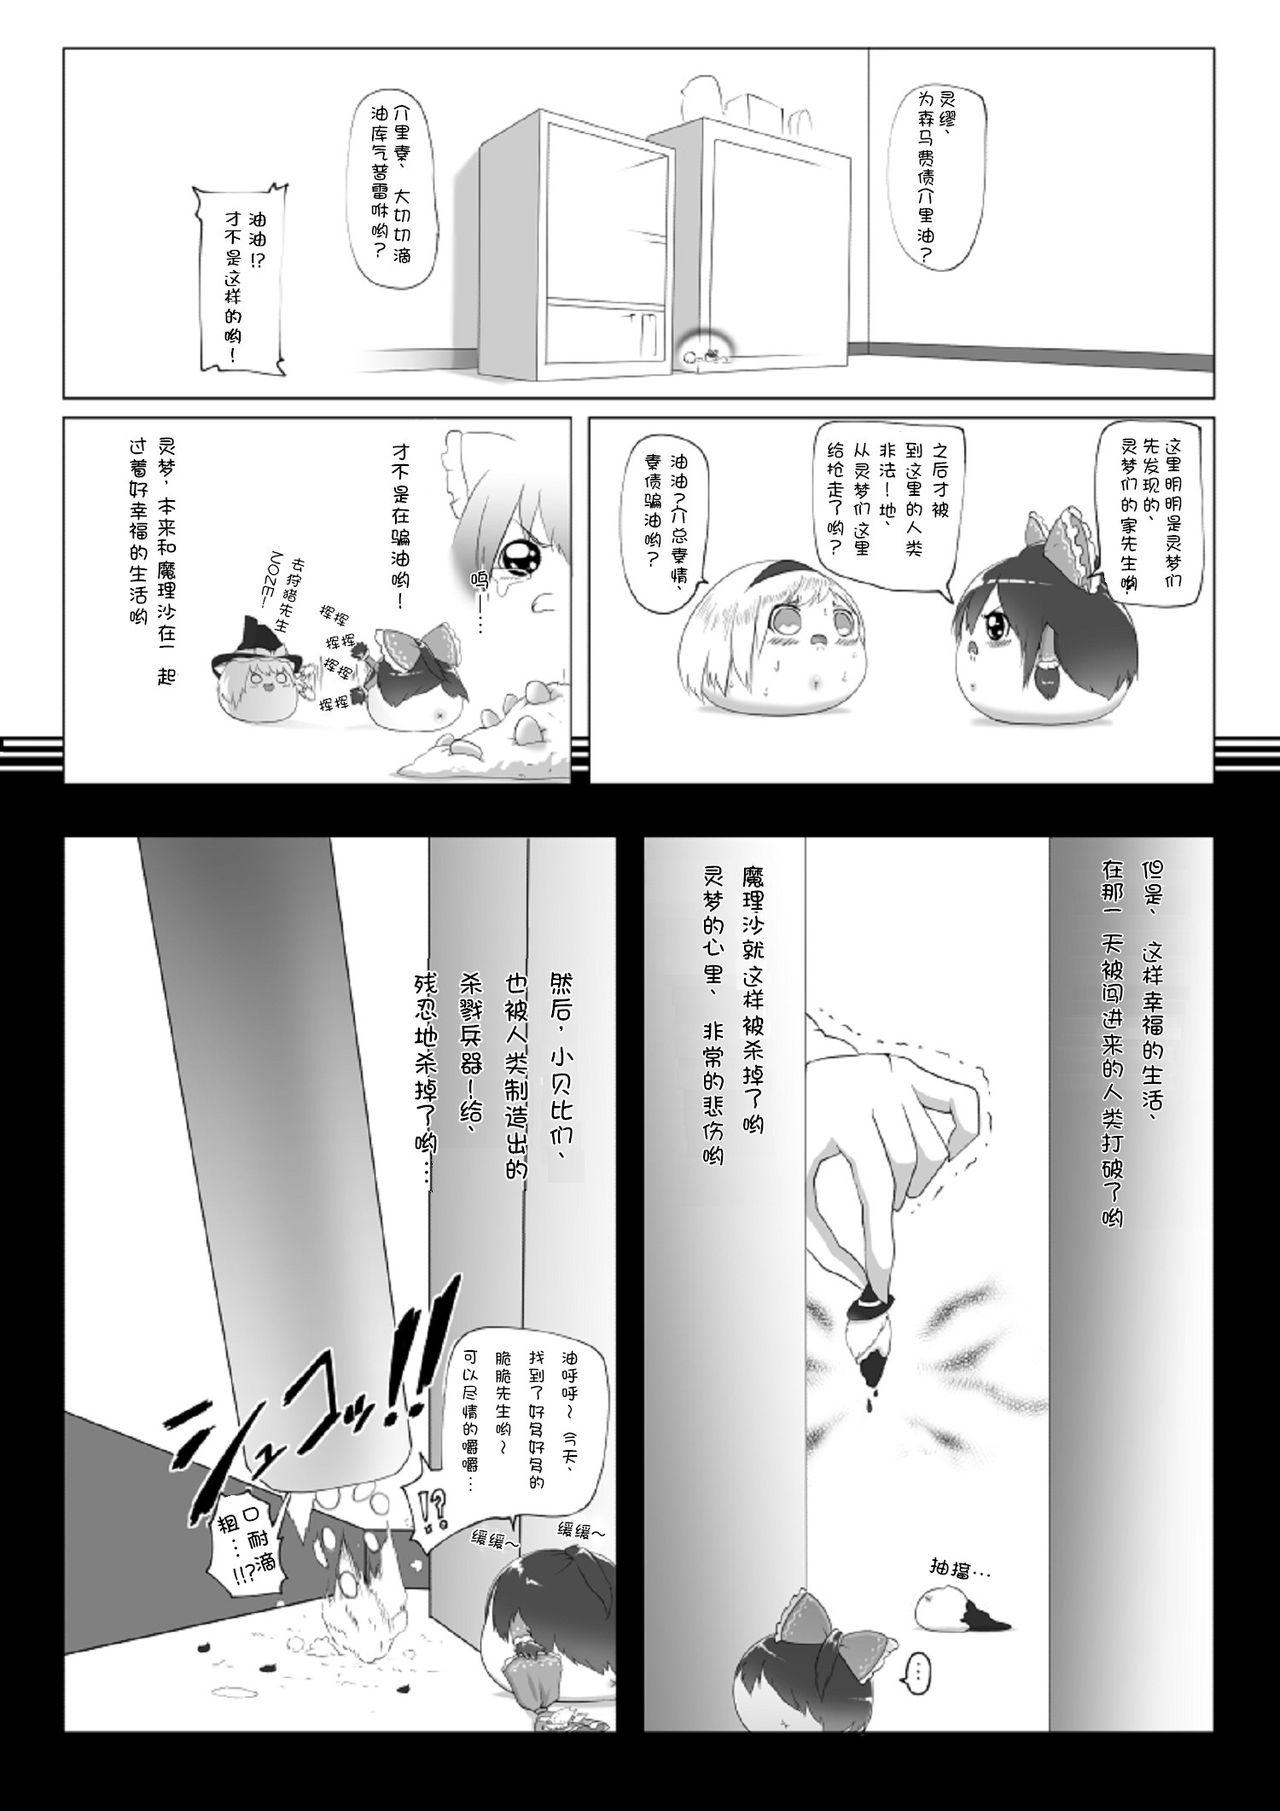 Clitoris ゆっくりがかってにはえてくるわけ（Chinese) - Touhou project Teens - Page 5